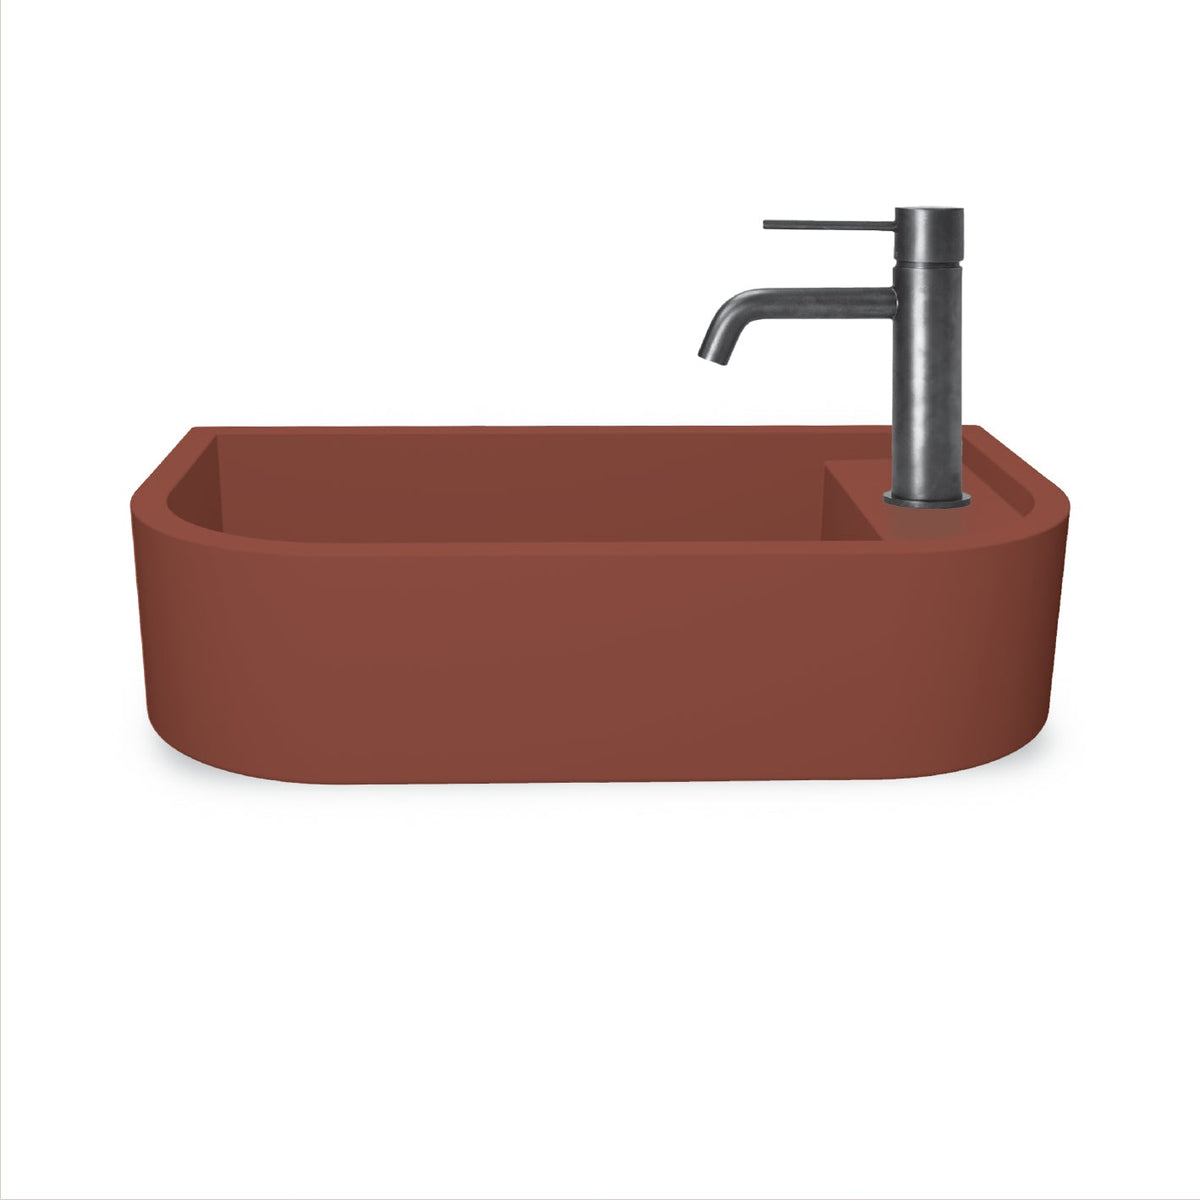 Loop 02 Basin - Overflow - Surface Mount (Clay,Tap Hole,Chrome)